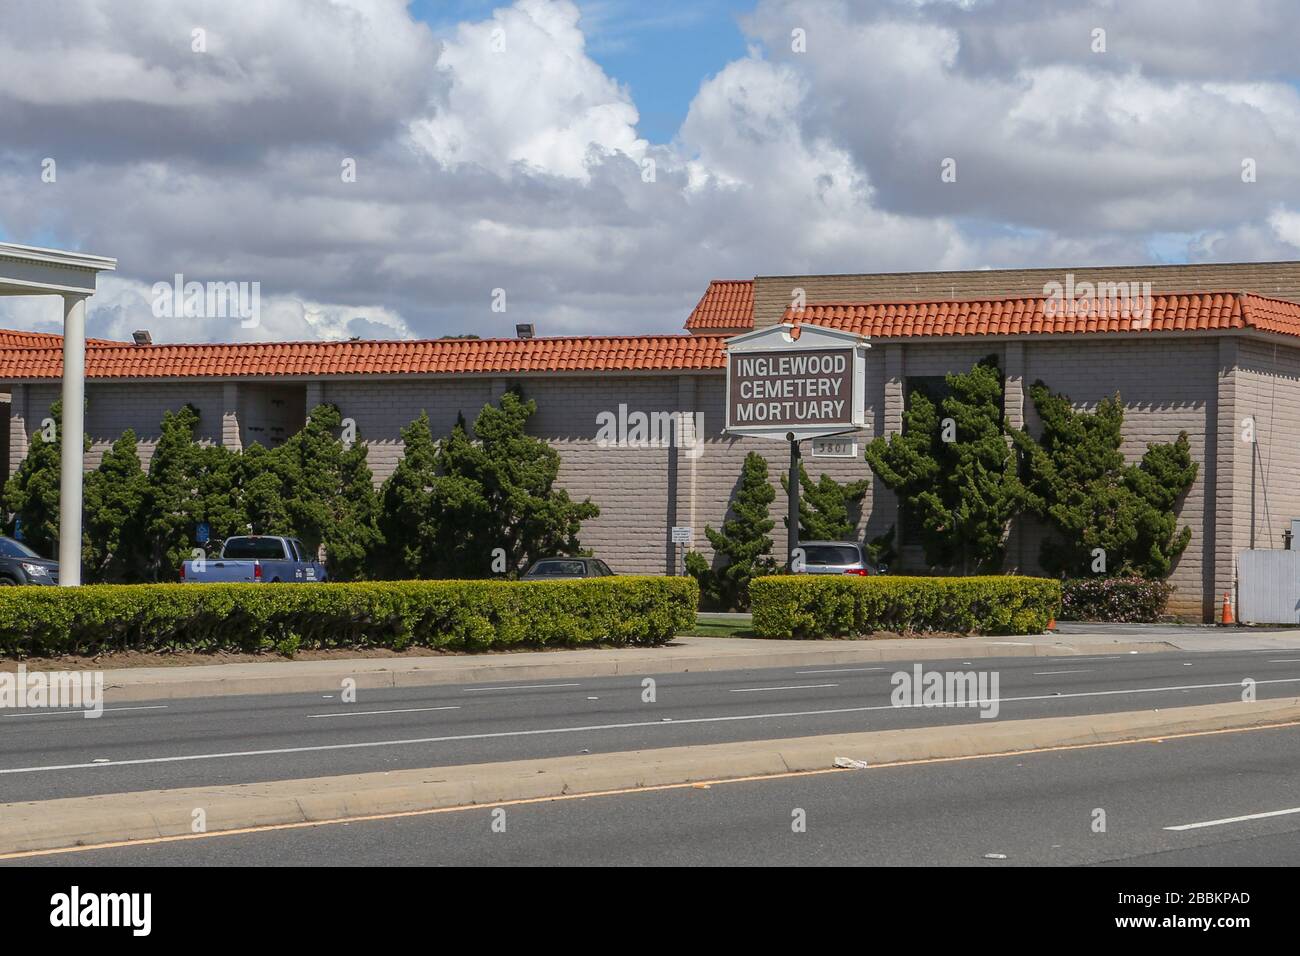 General view of Inglewood Cemetery Mortuary located at 3801 W Manchester Blvd, on Wednesday, March 25, 2020 in Inglewood, California, USA. (Photo by IOS/Espa-Images) Stock Photo